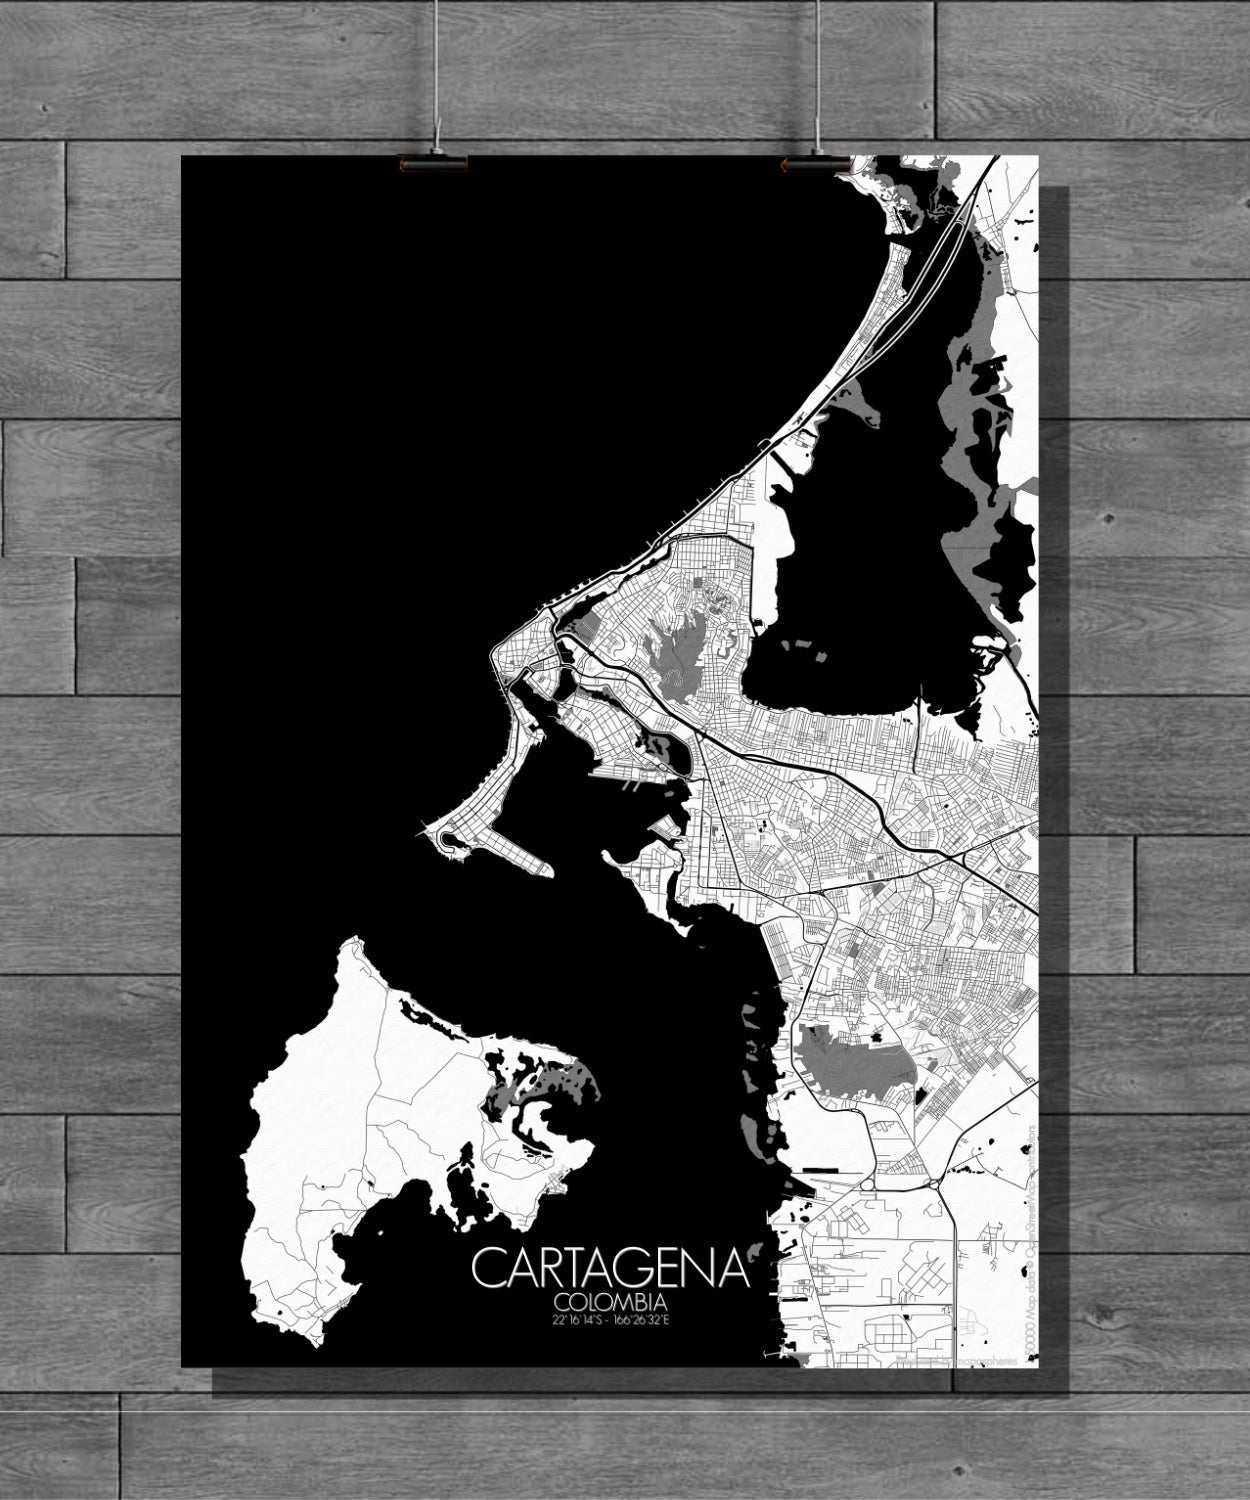 Cartagena Black and White full page design poster city map